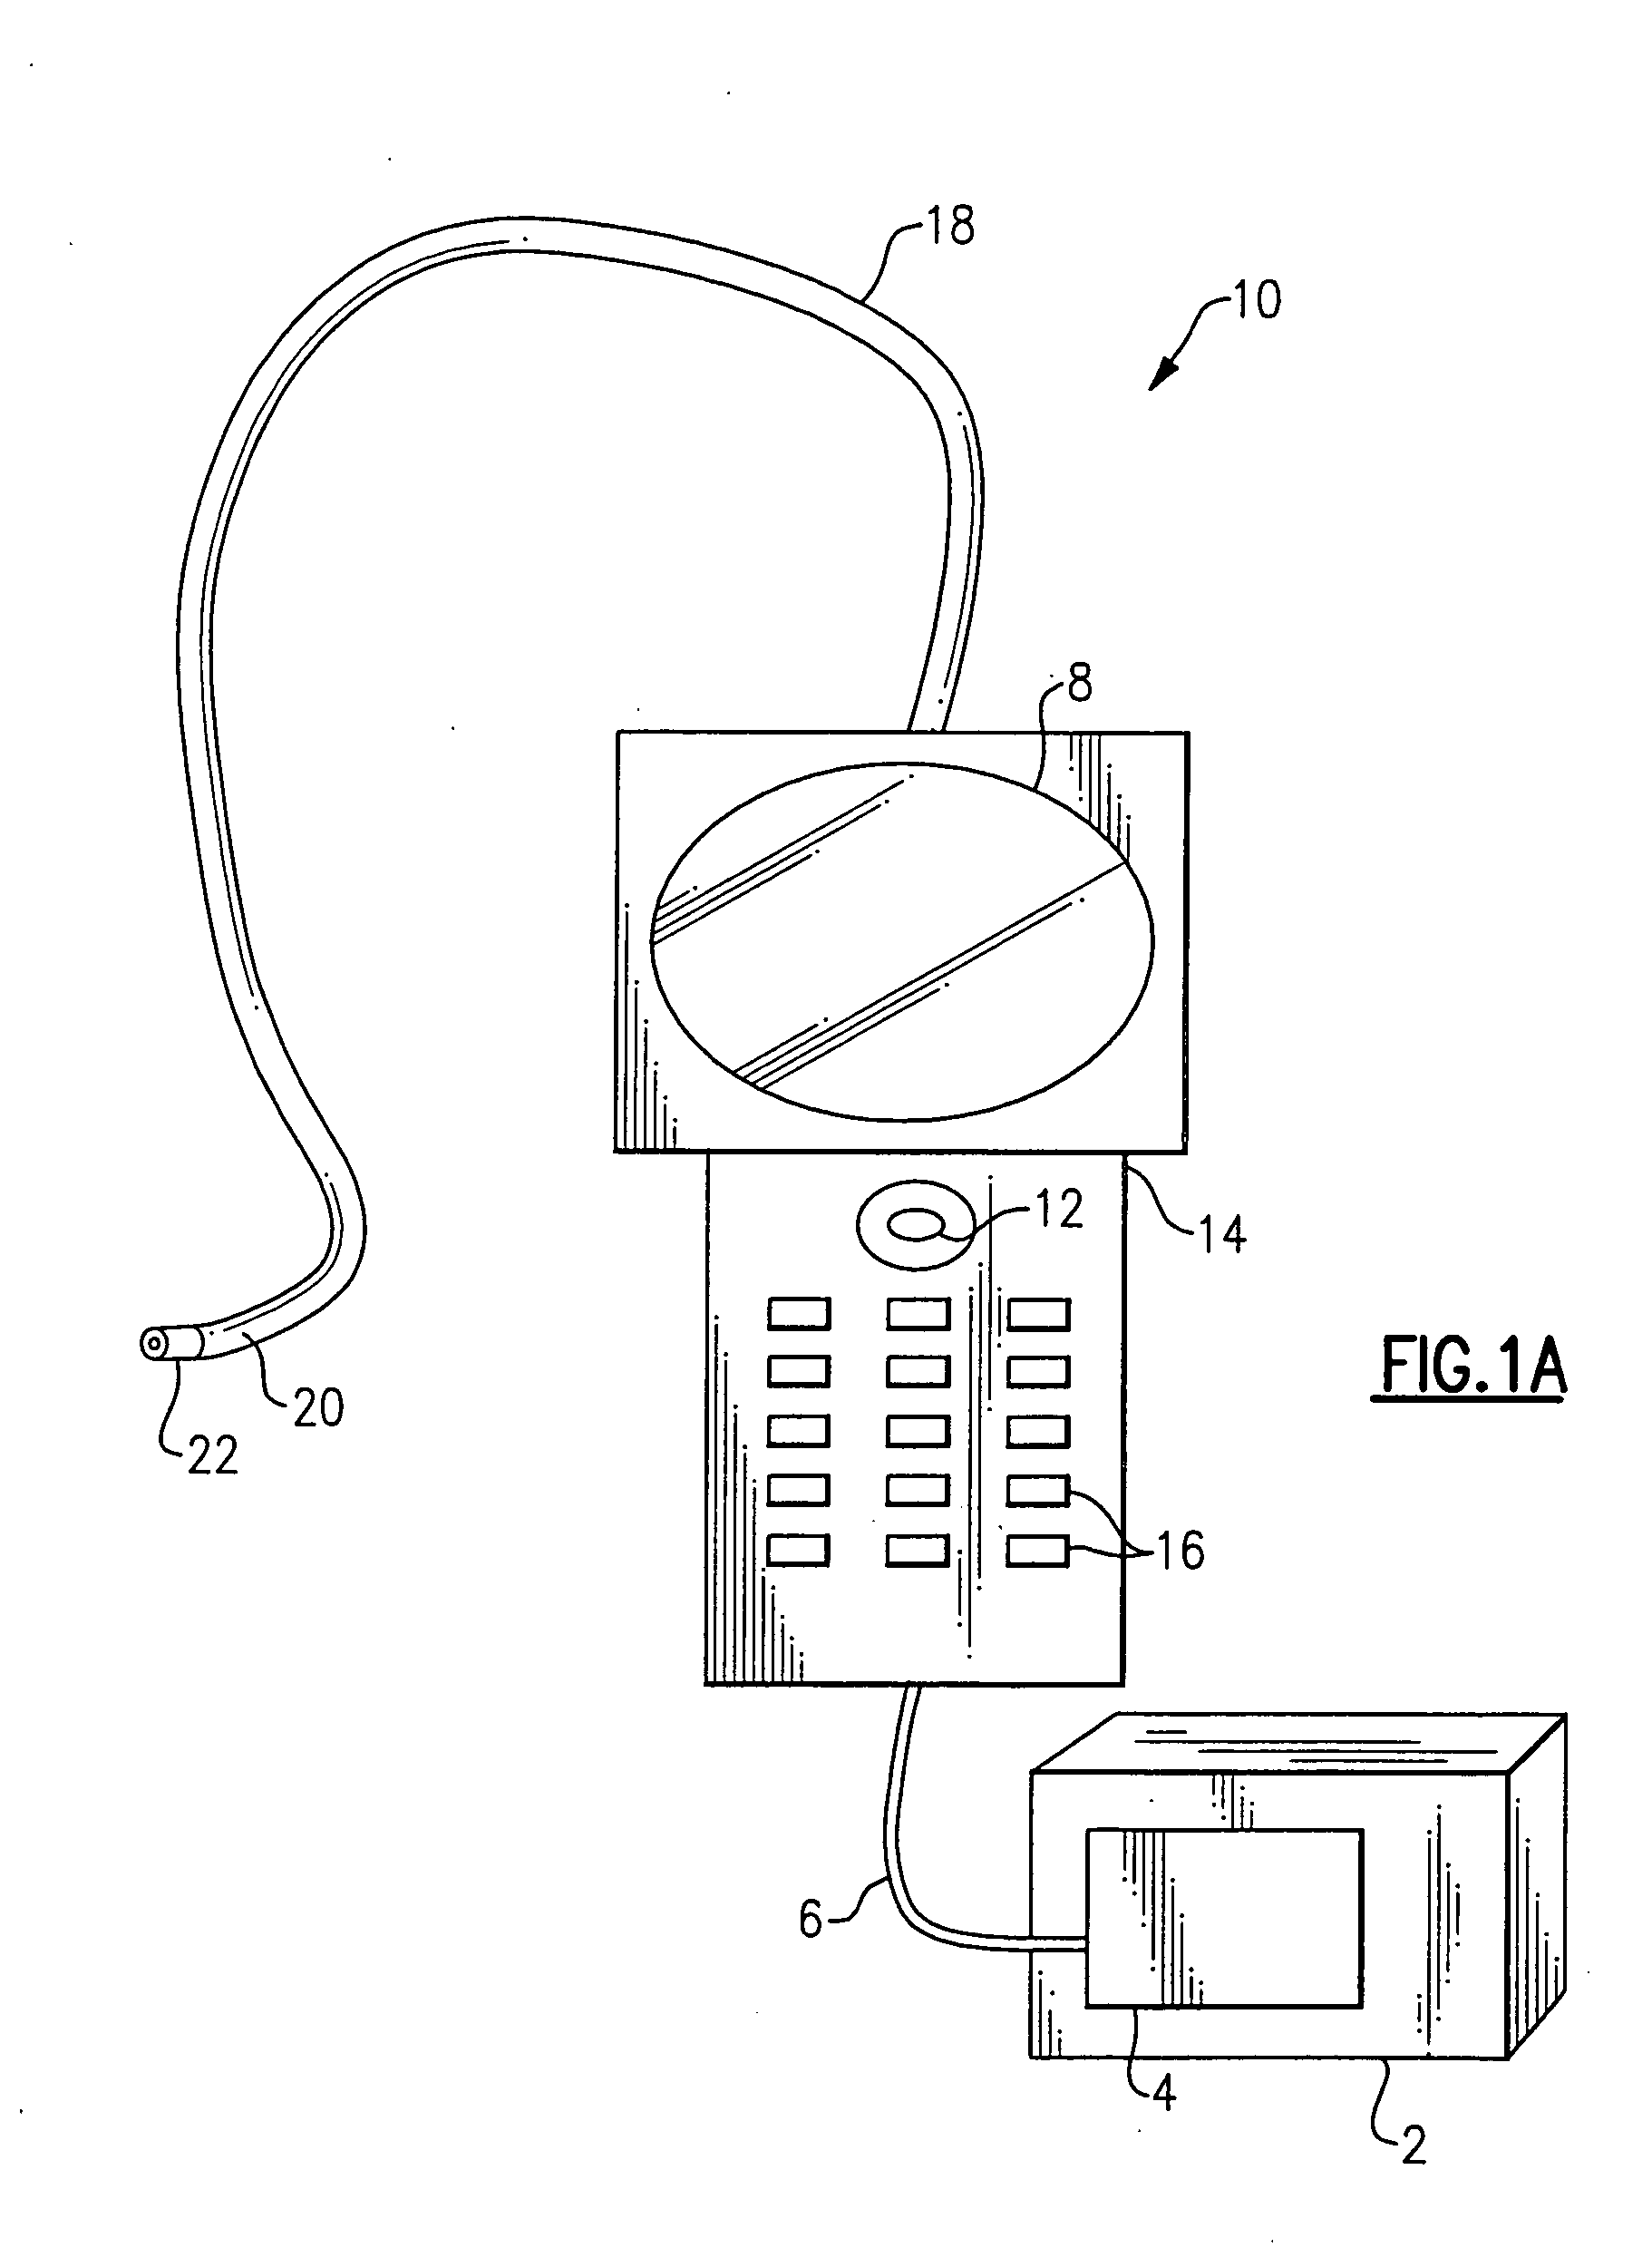 Method and apparatus for improving the operation of a remote viewing device